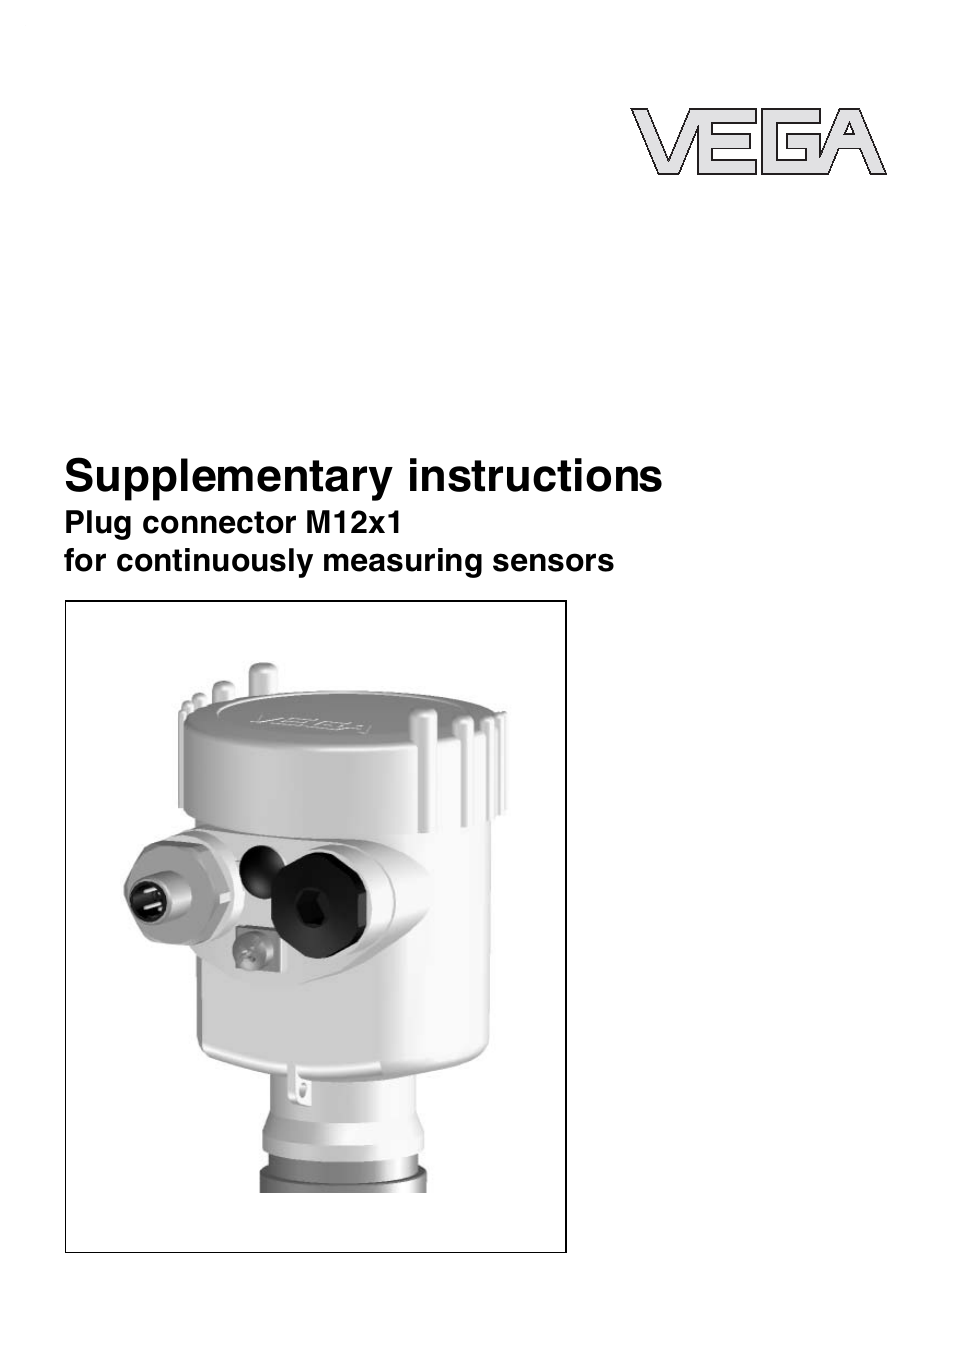 Plug connector M12x1 for continuously measuring sensors